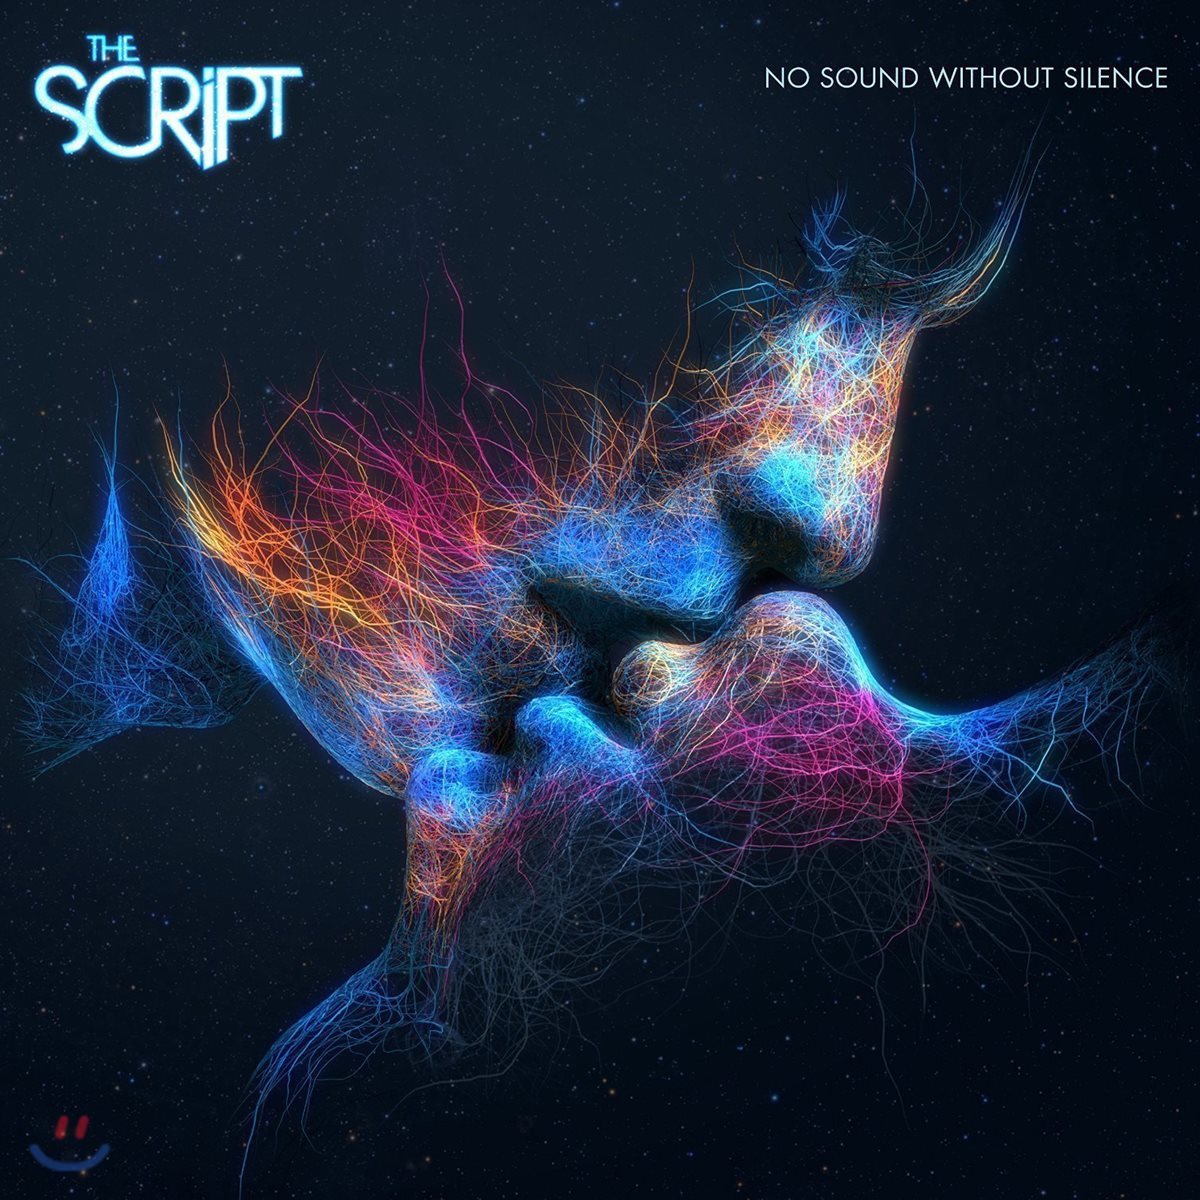 The Script - No Sound Without Silence 스크립트 정규 4집 [LP]